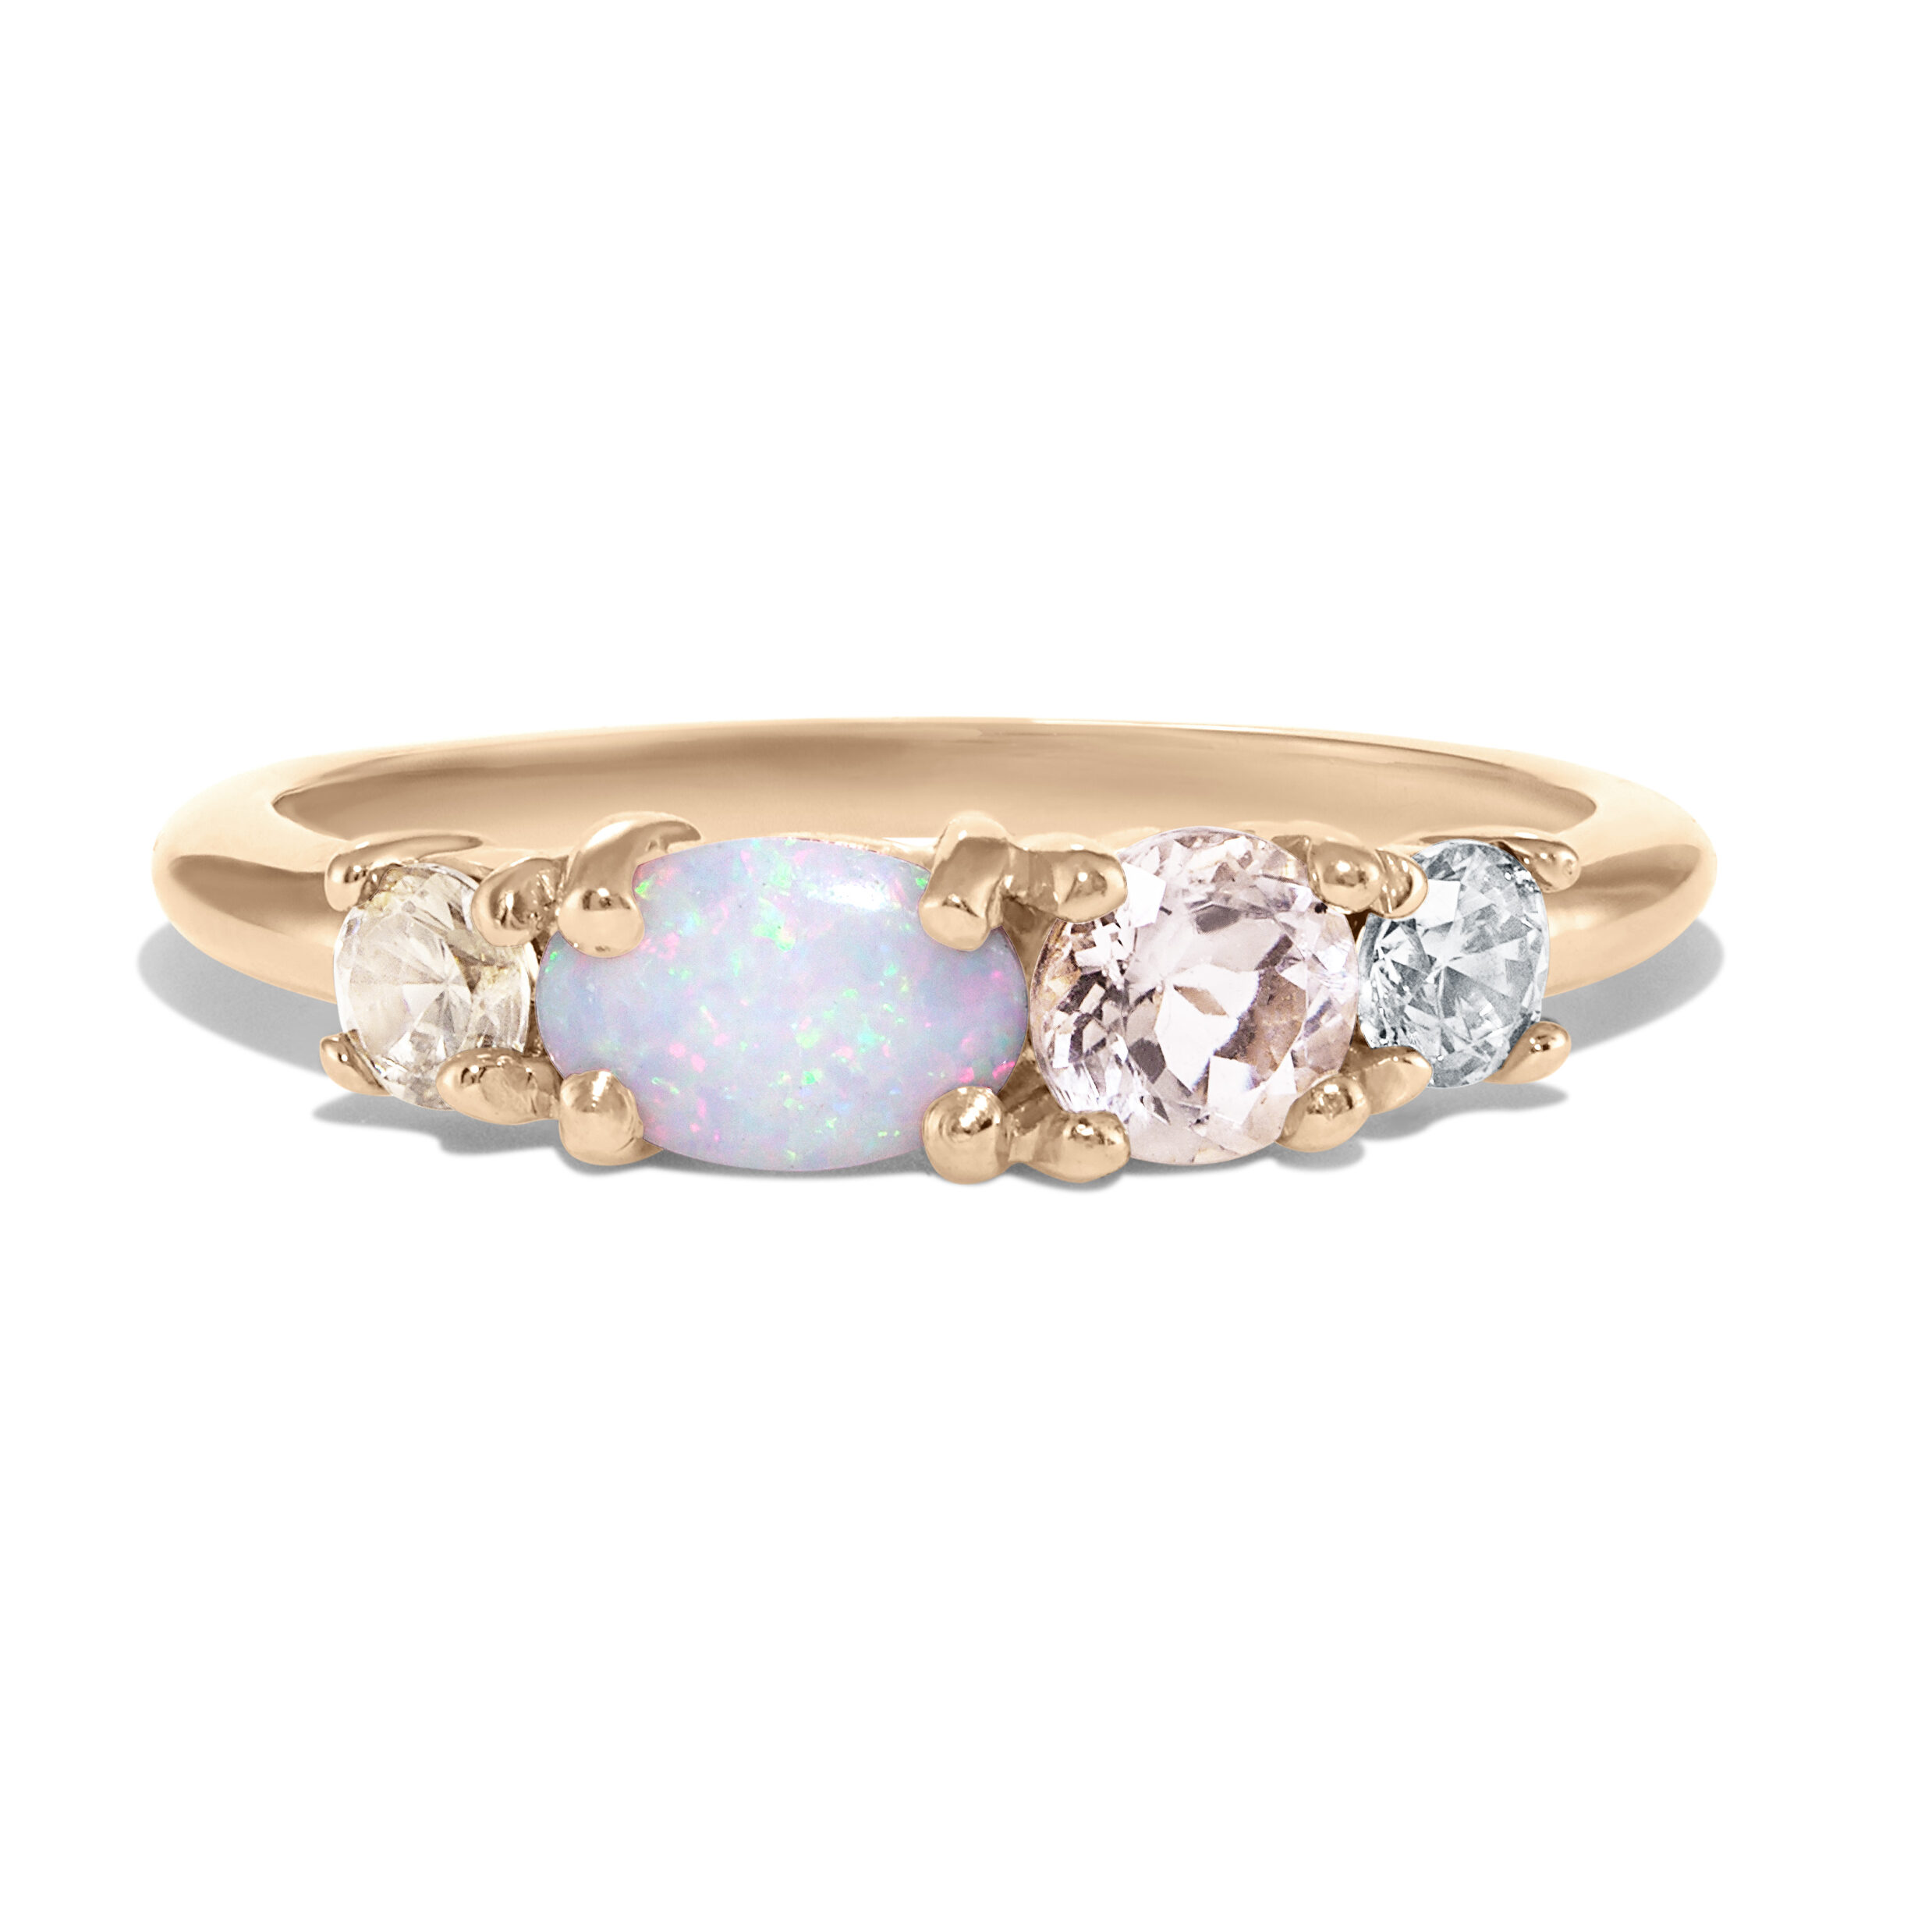 This ring glistens with a line of morganite, champagne diamond, opal, and diamond.